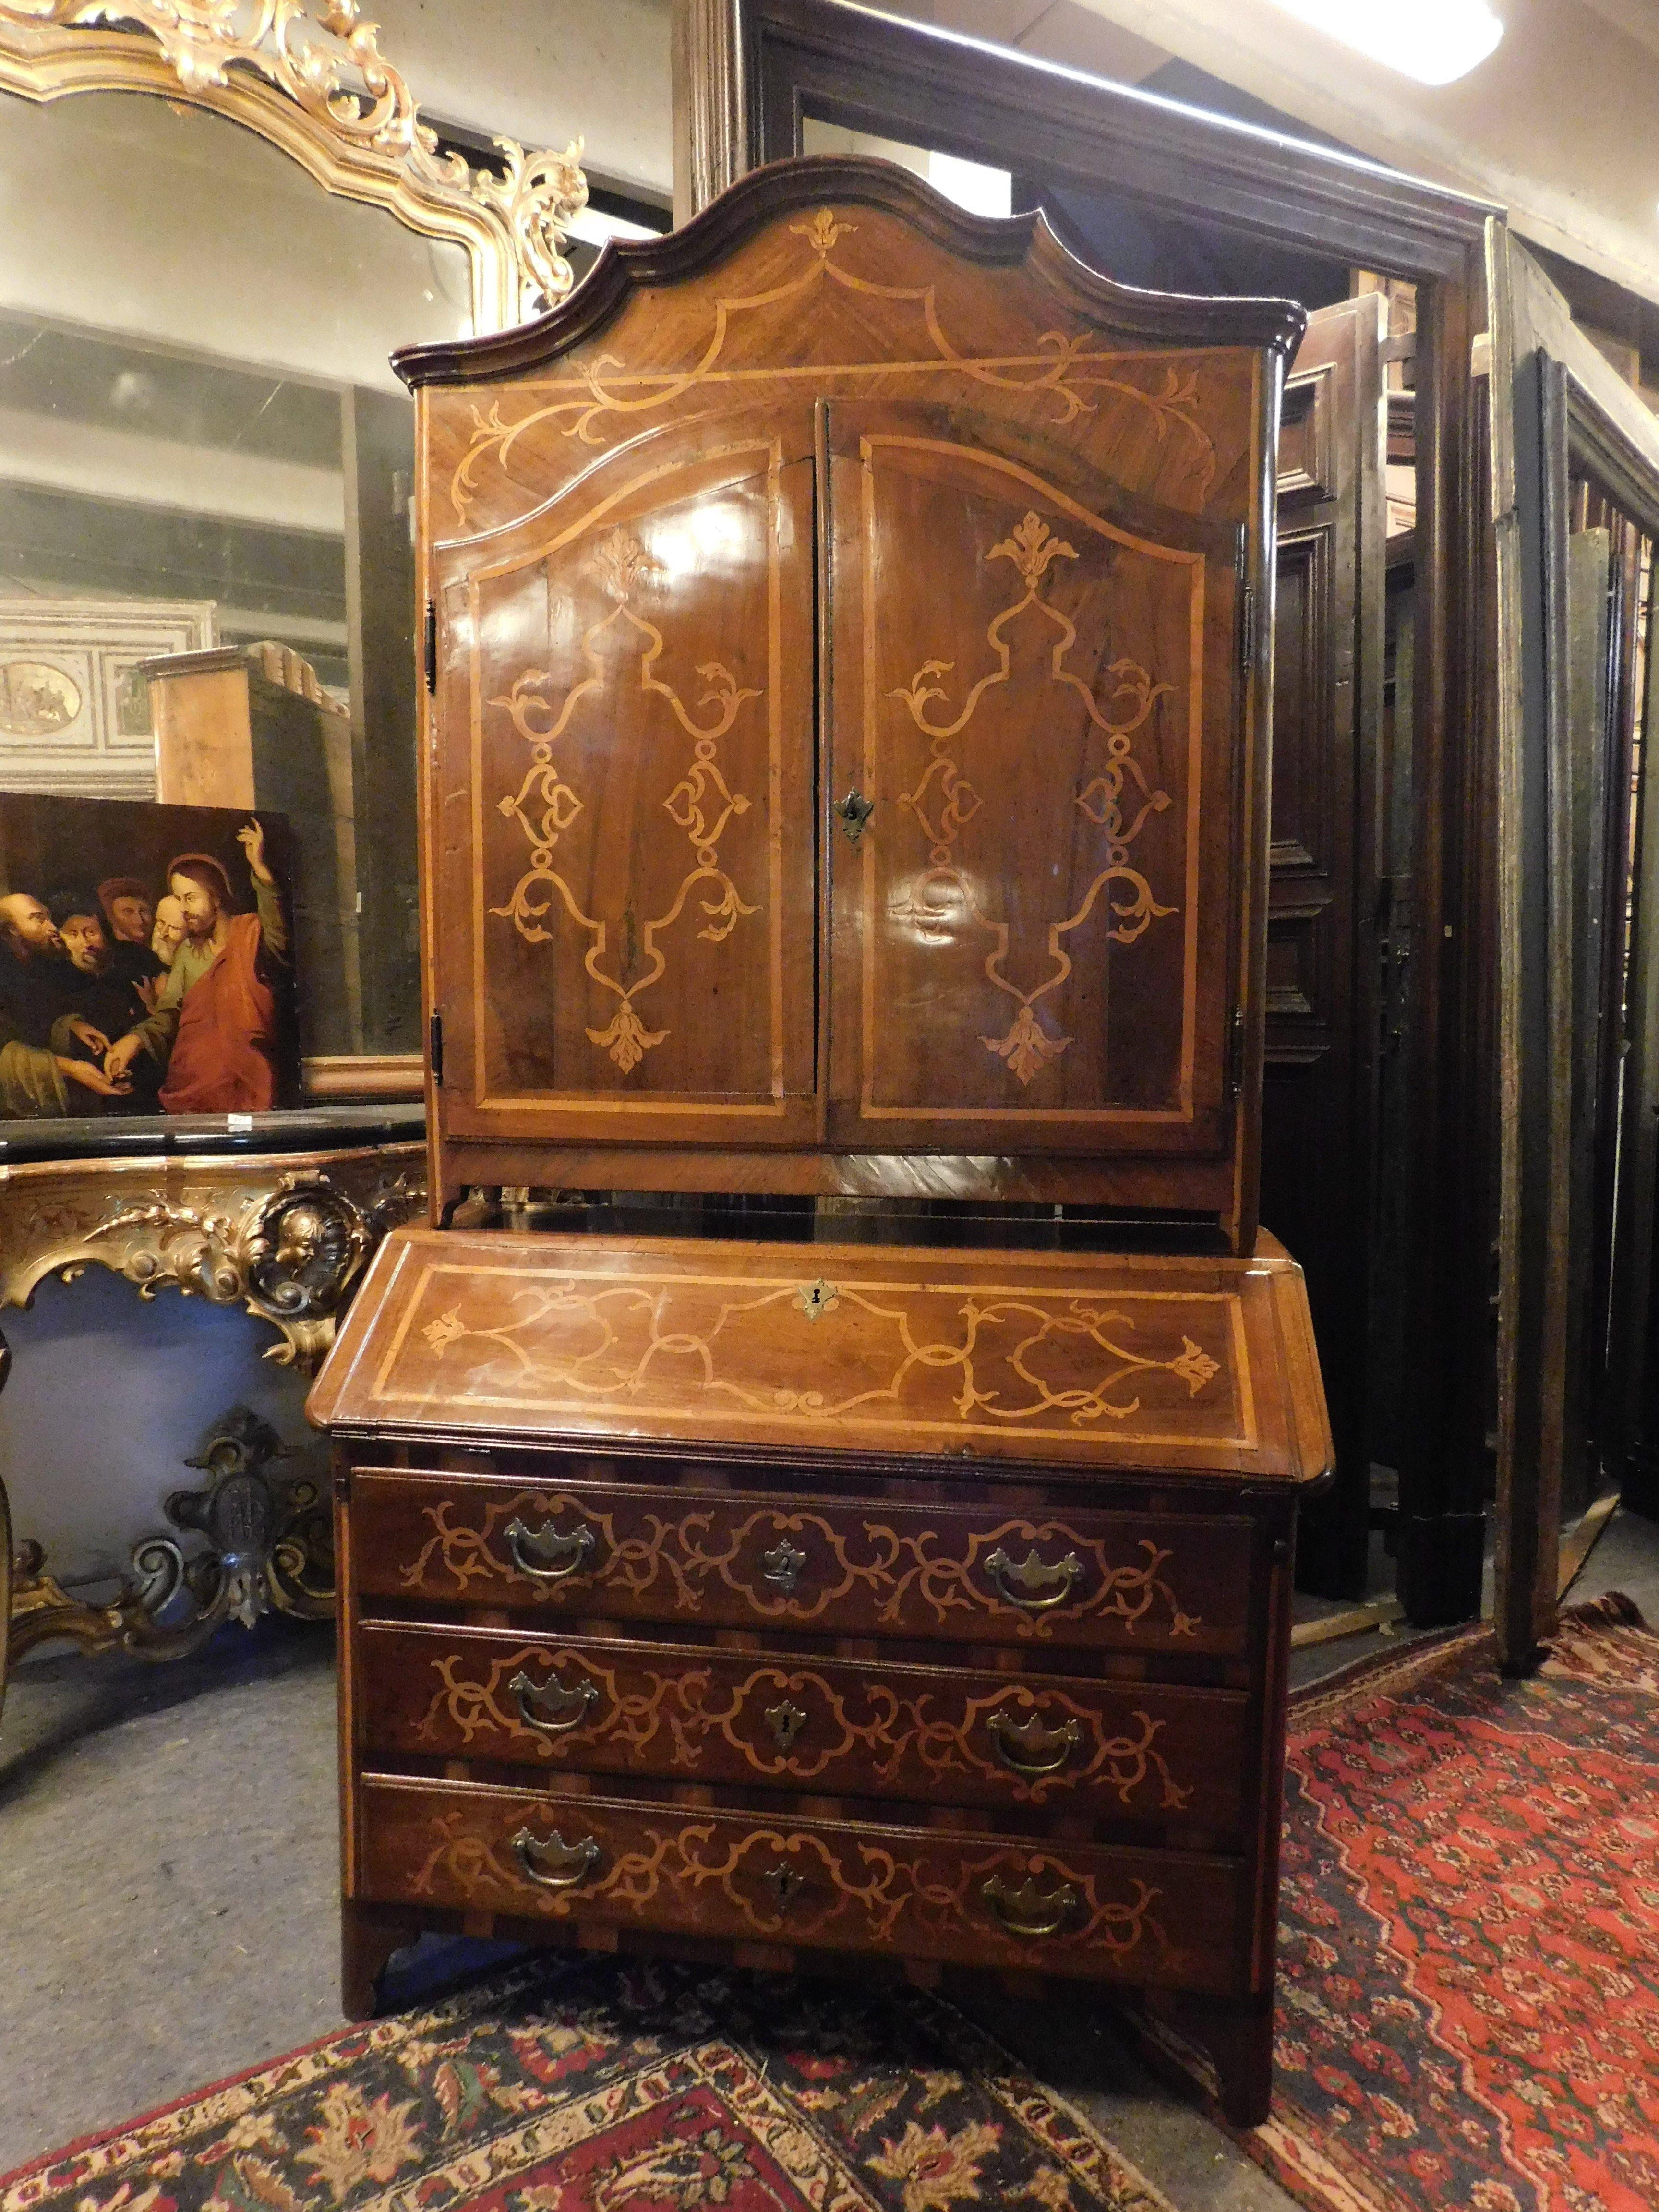 Antique Trumeau cabinet in walnut richly inlaid with light woods, double body with doors, drawers and central flap, from the 18th century, Italy, maximum size L 120 X D 55 X H 226 cm (base 94 cm, doors 132 cm)